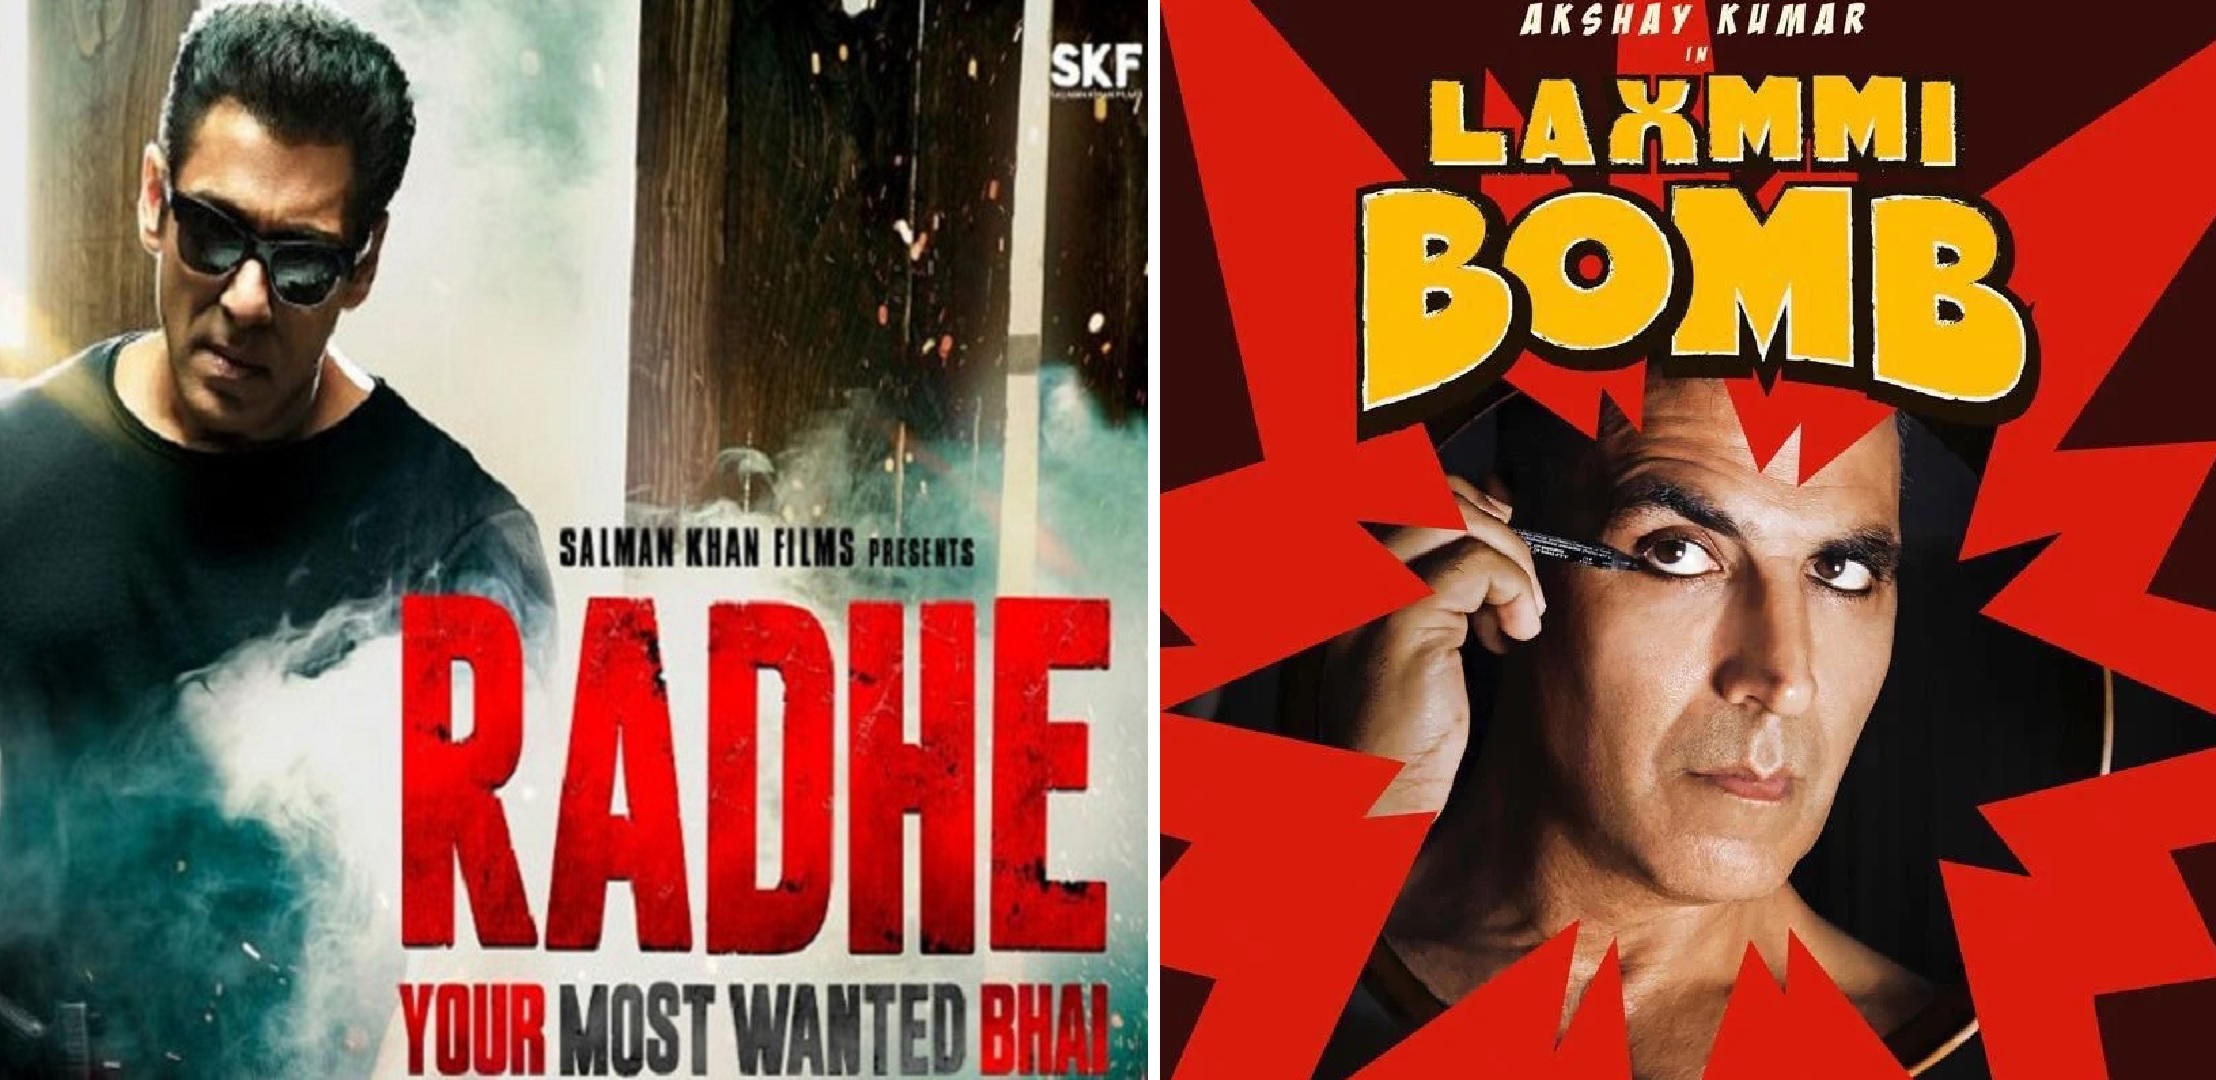 Radhe VS Laxmmi Bomb – Which Movie Will Be a Bigger Hit? Vote Here!